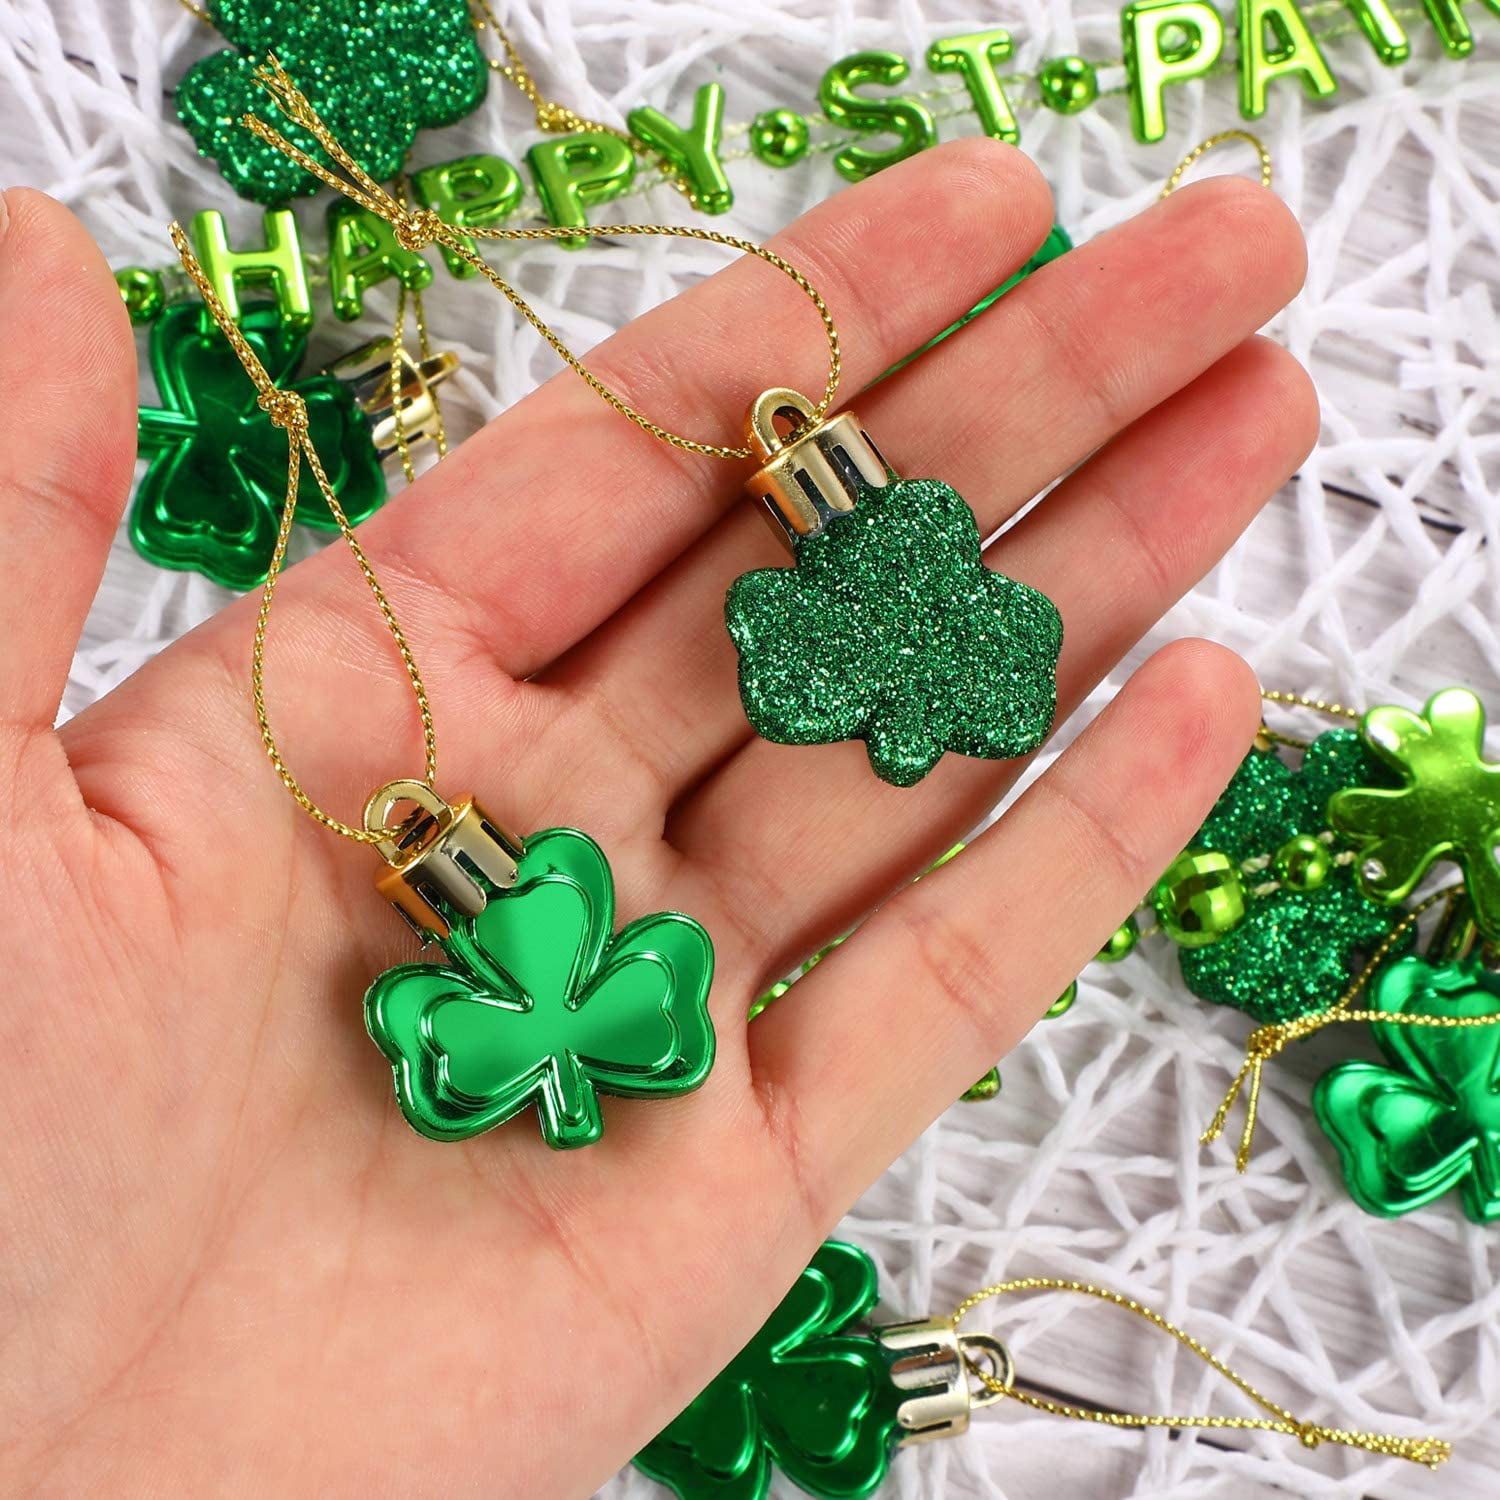 36 Pieces St Patricks Day Shamrocks Ornament Good Luck Clover Hanging Bauble for Tree Baubles Table Shelf Festival Decorations